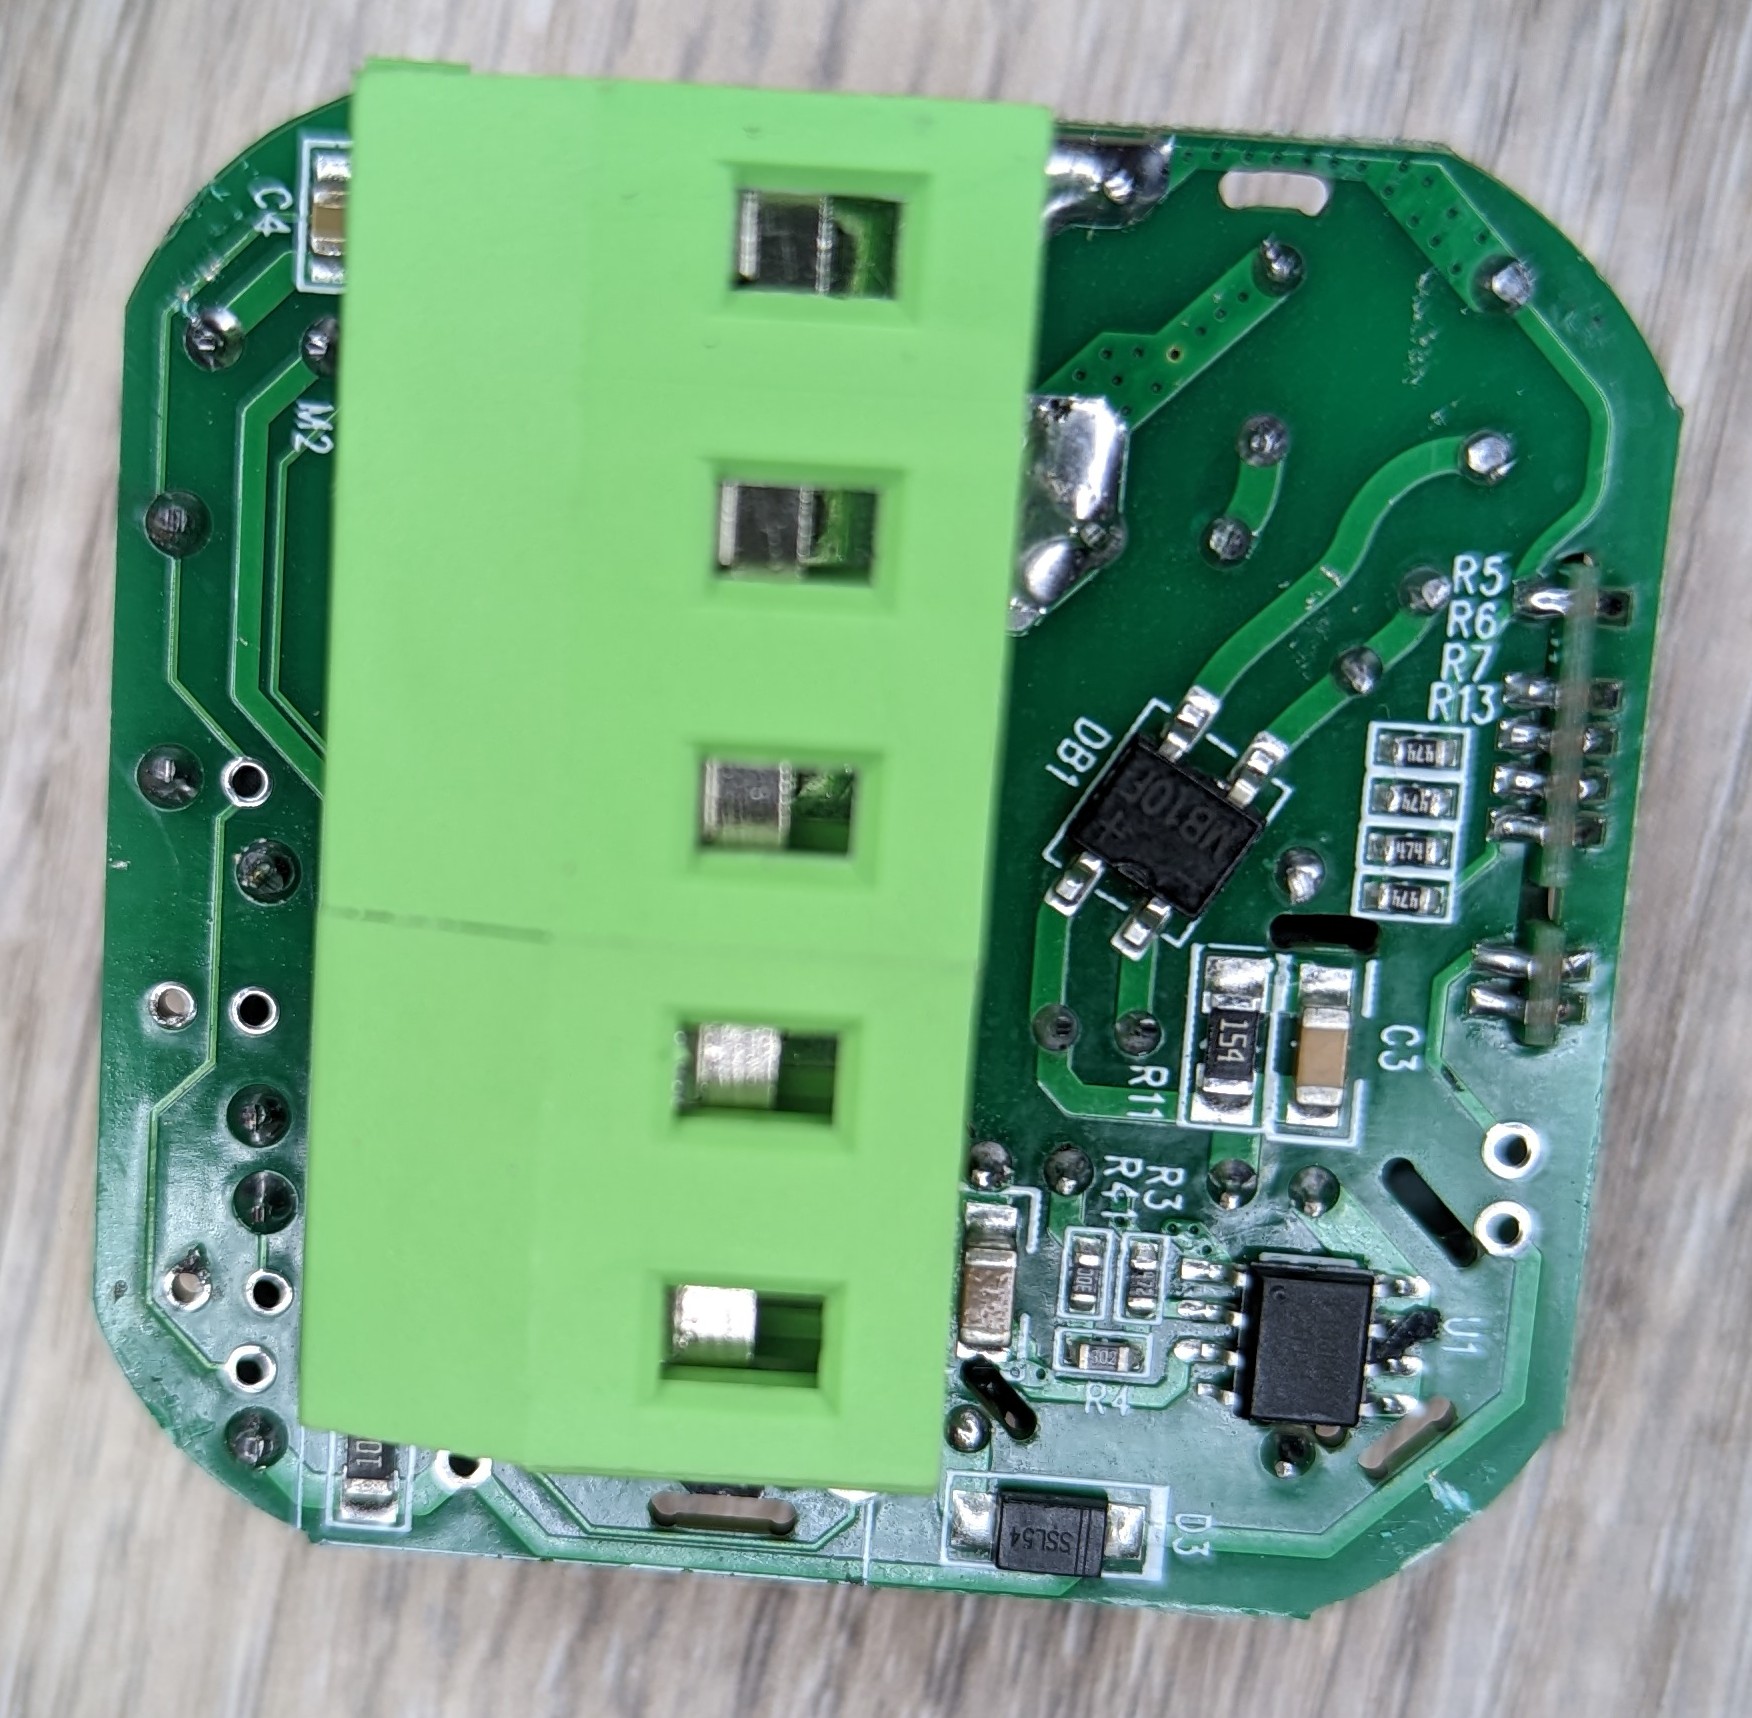 Another picture of the power module PCB from the rear. A single unlabeled IC and several passive components are present